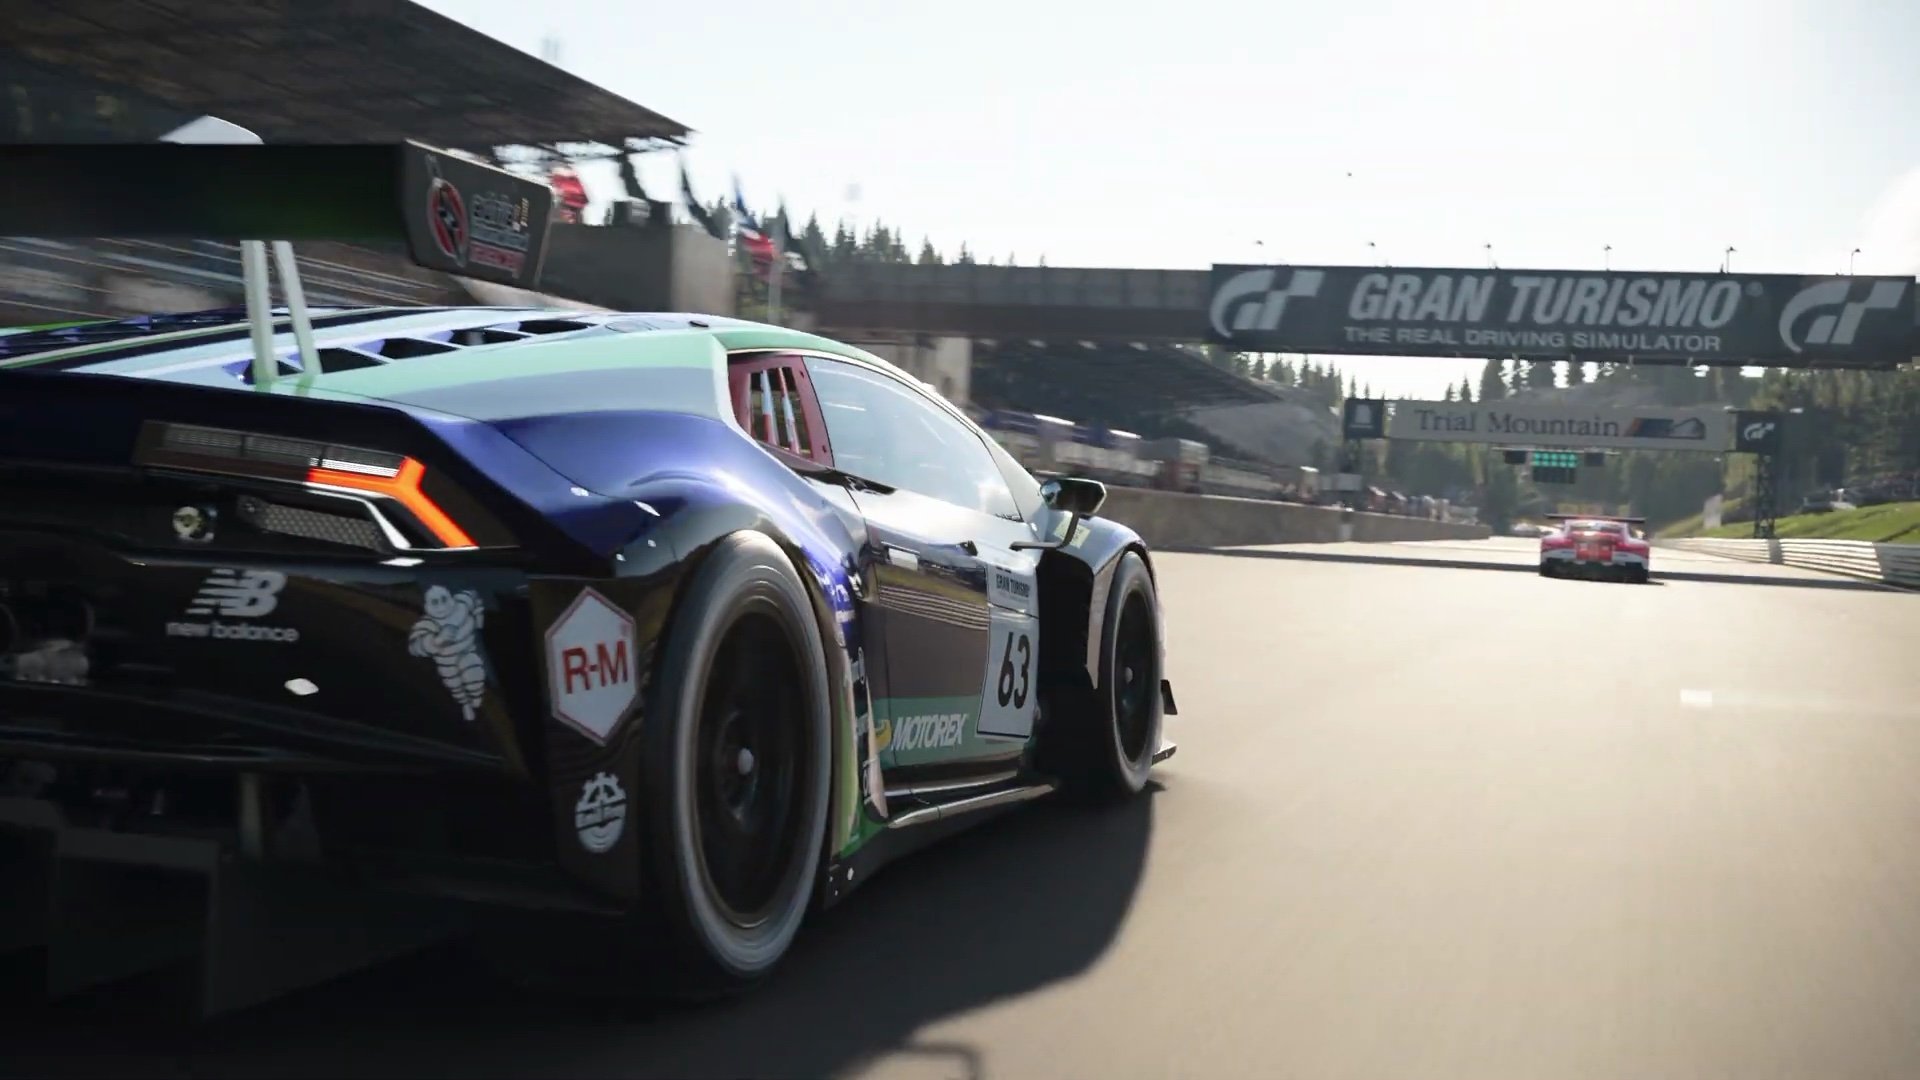 Gran Turismo 7’s New Features Detailed Used Cars, Body Upgrades